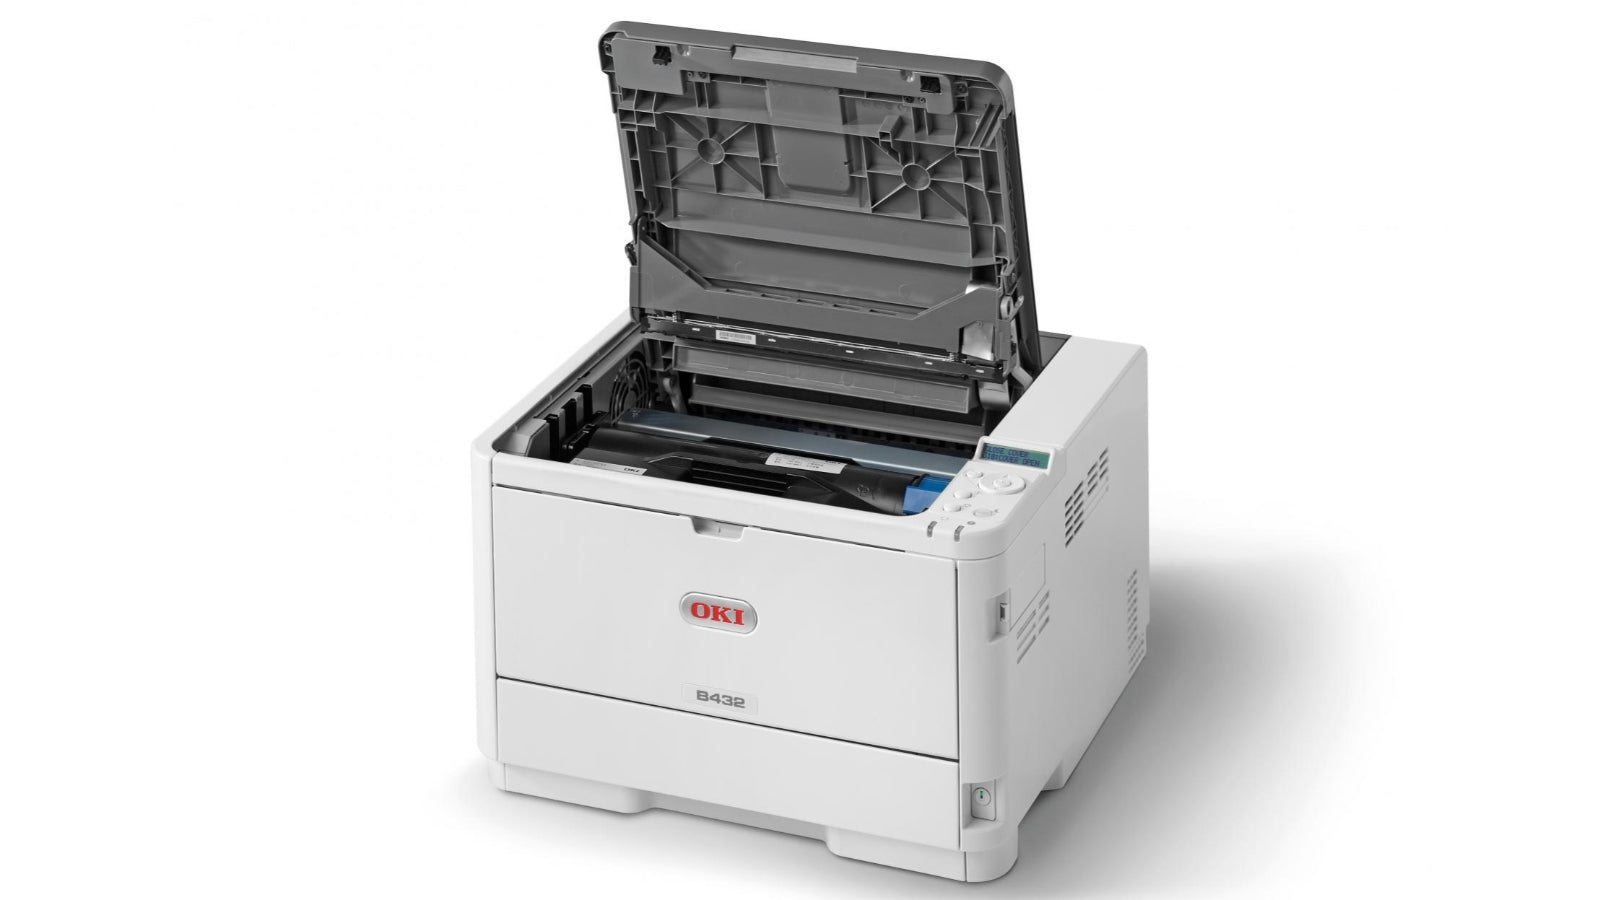 OKI B432dn Mono LED Printer  40ppm  with  Duplex and Network